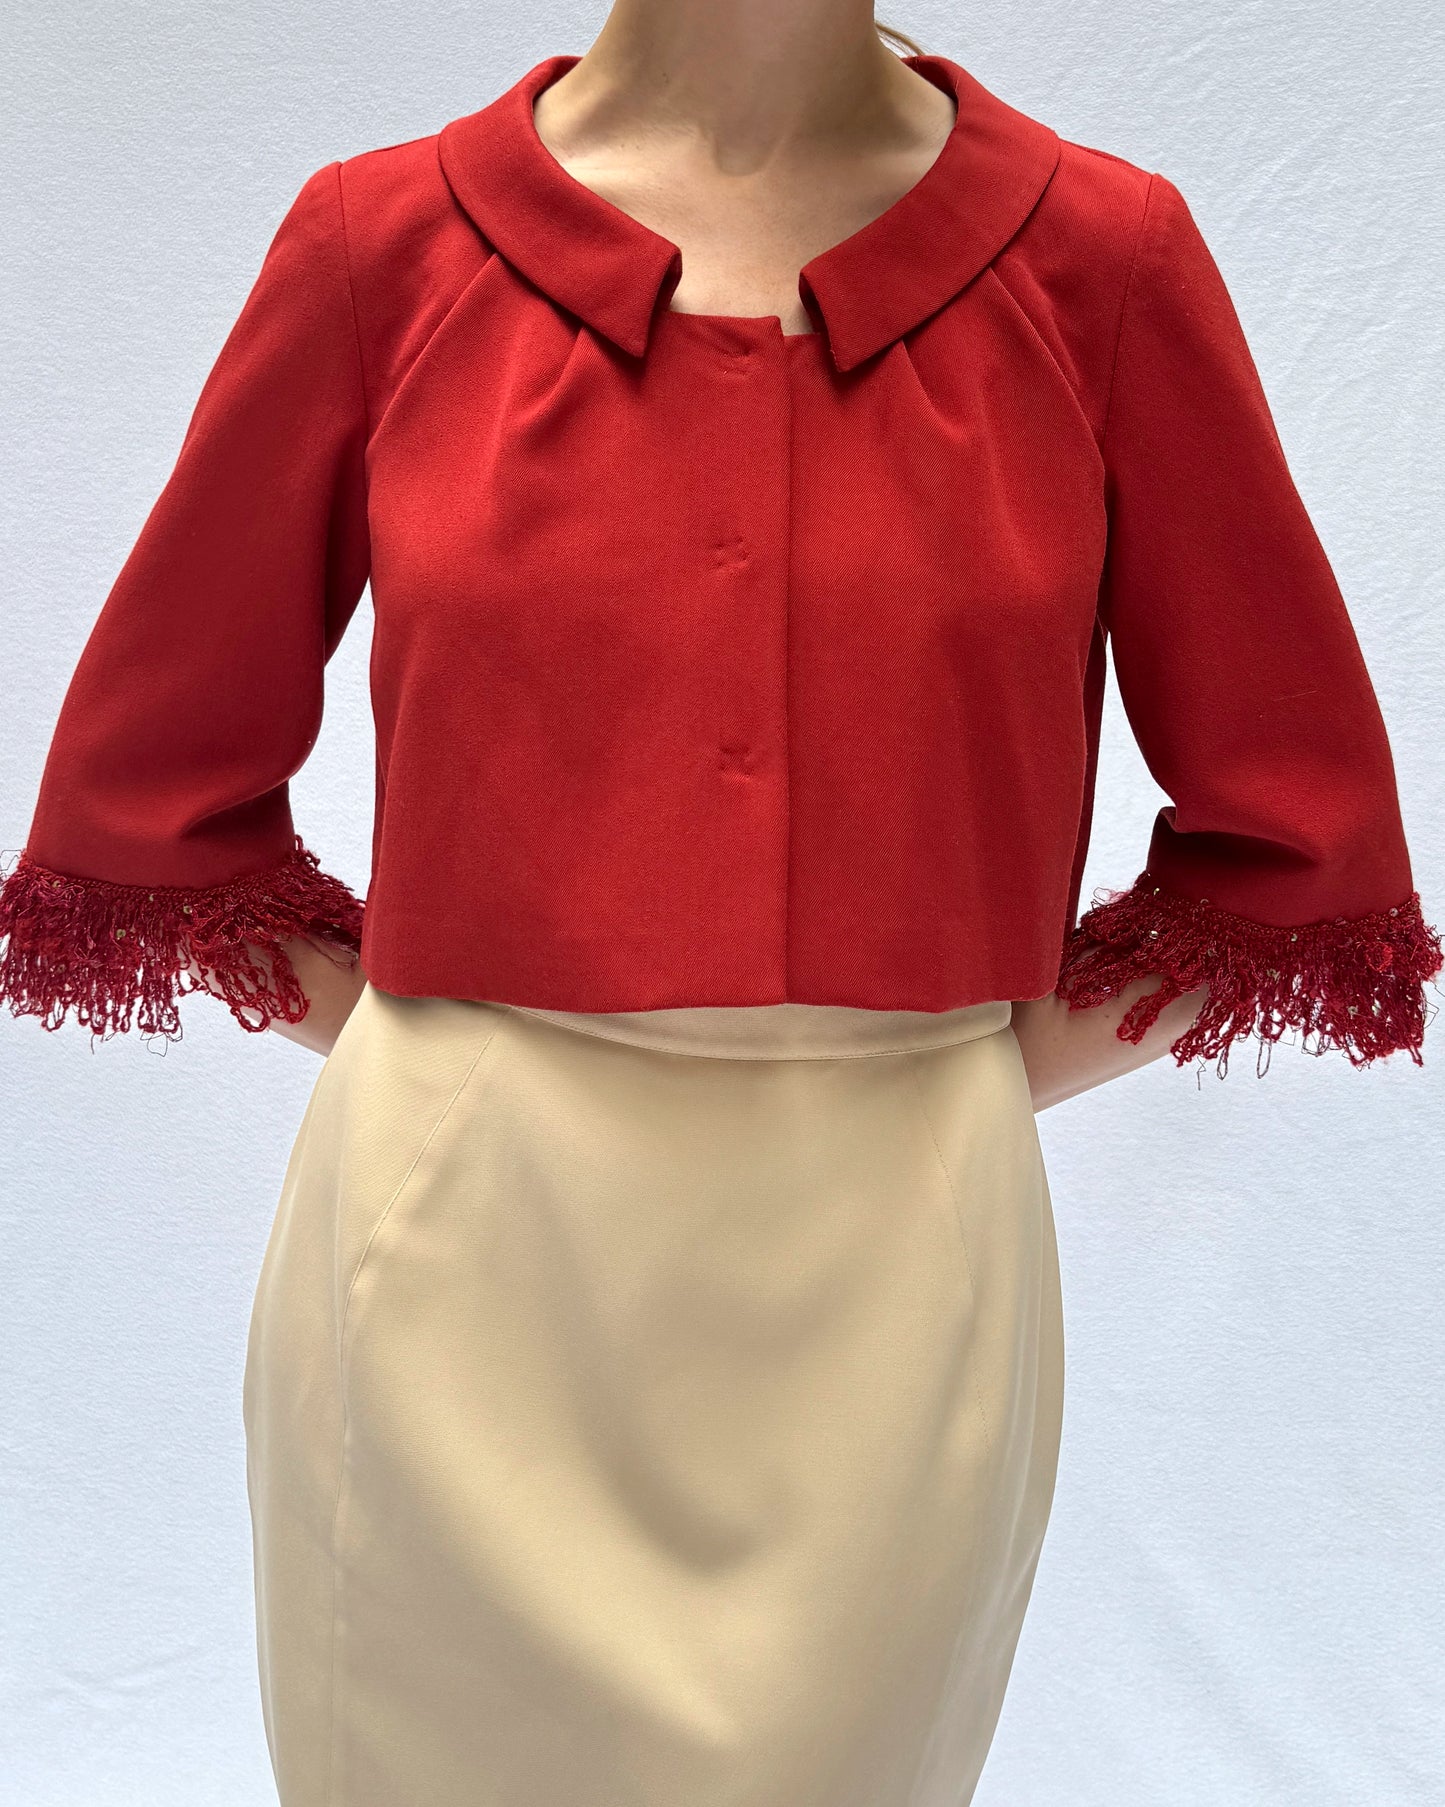 1960s-Style Cropped Cocktail Jacket